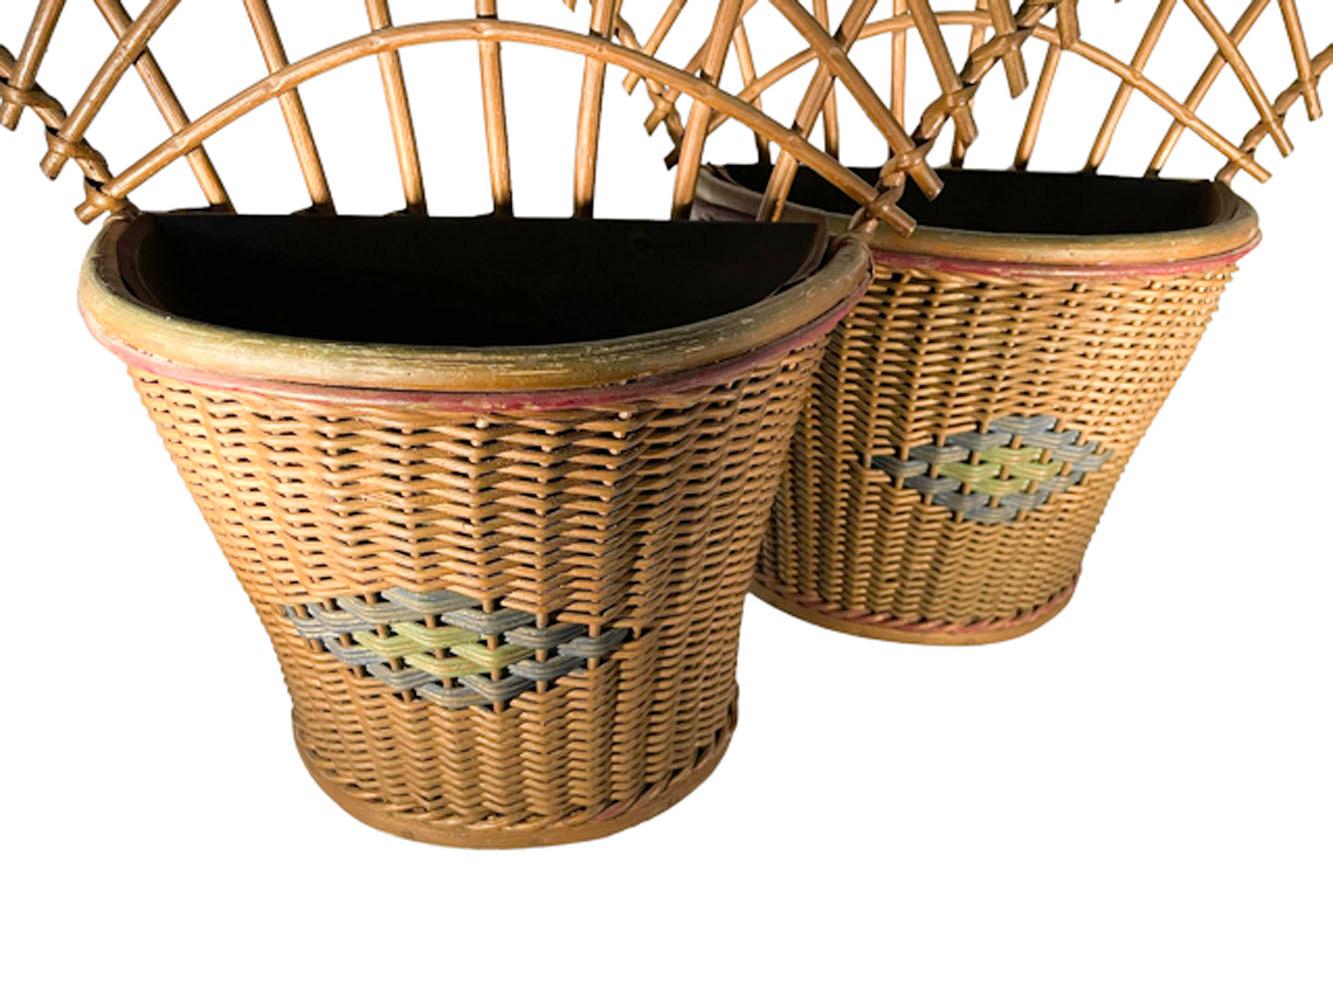 American Pair of Art Deco Wicker Wall Planters with Trellis Backs in Original Condition For Sale